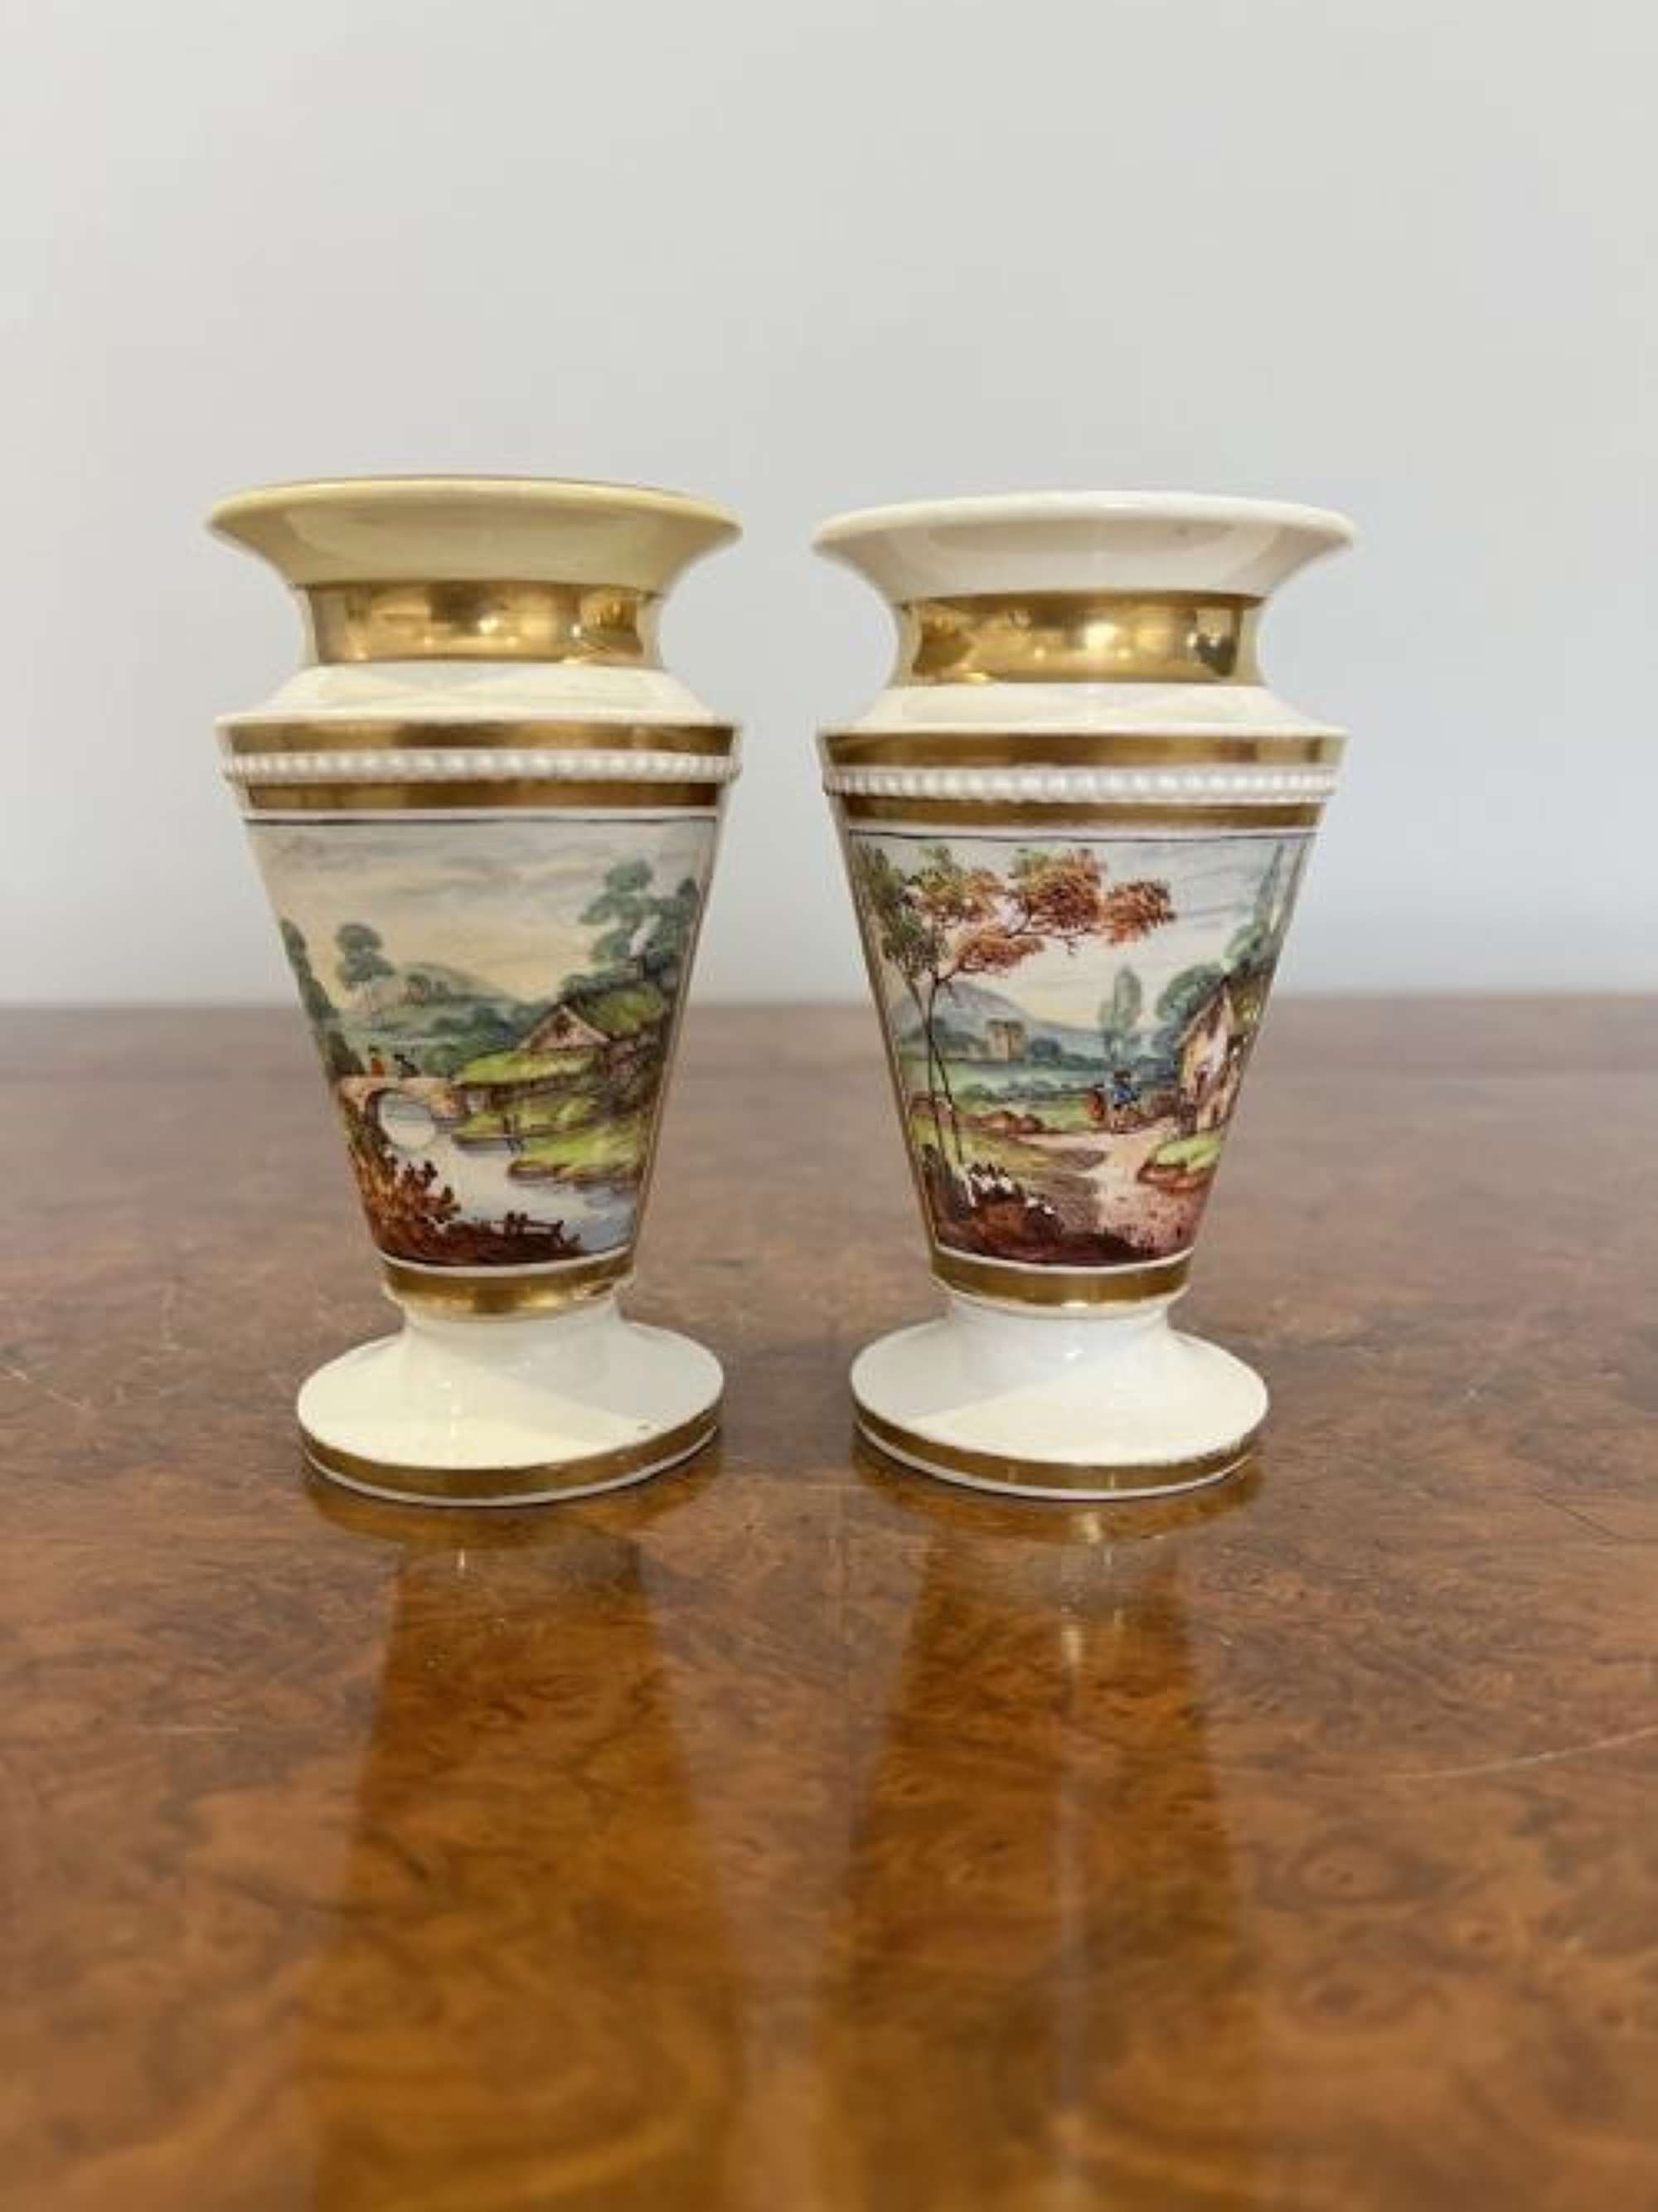 Fantastic Quality Pair Of Antique Victorian Spill Vases